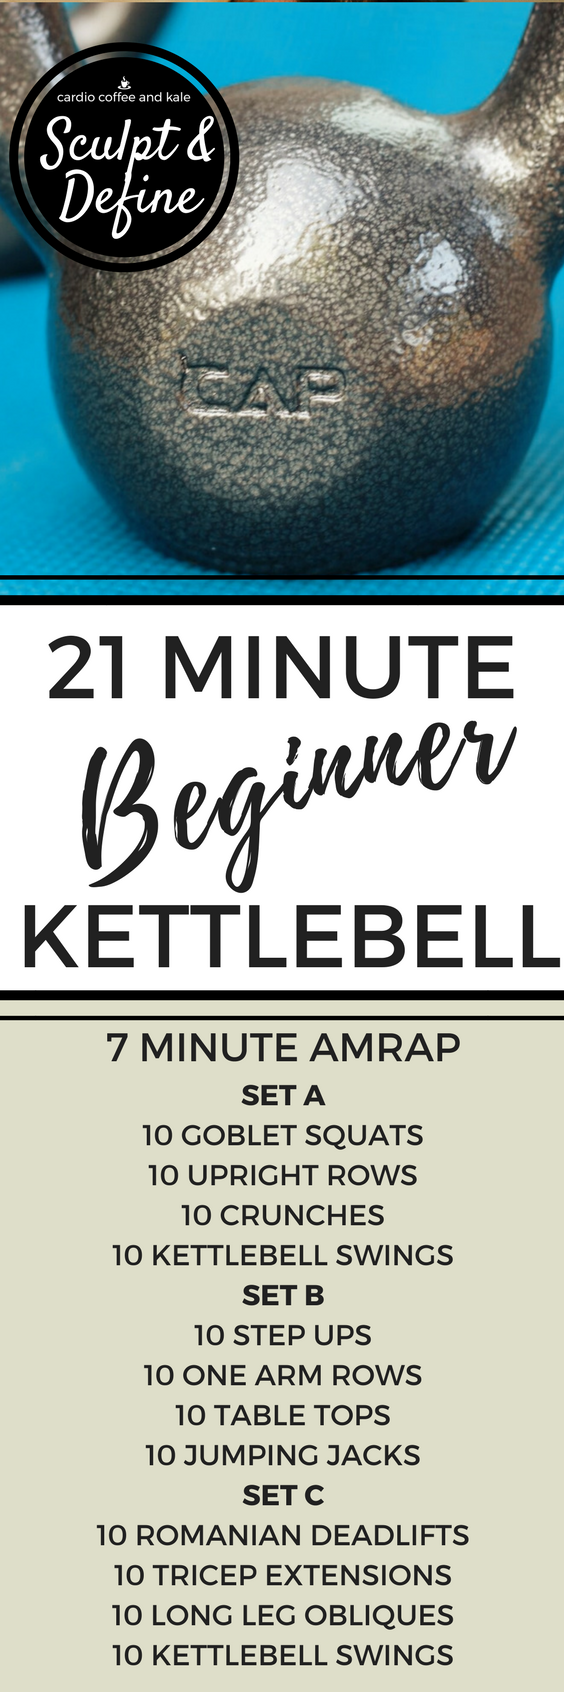 21 Minute Full Body Kettlebell Workout — cardio coffee and